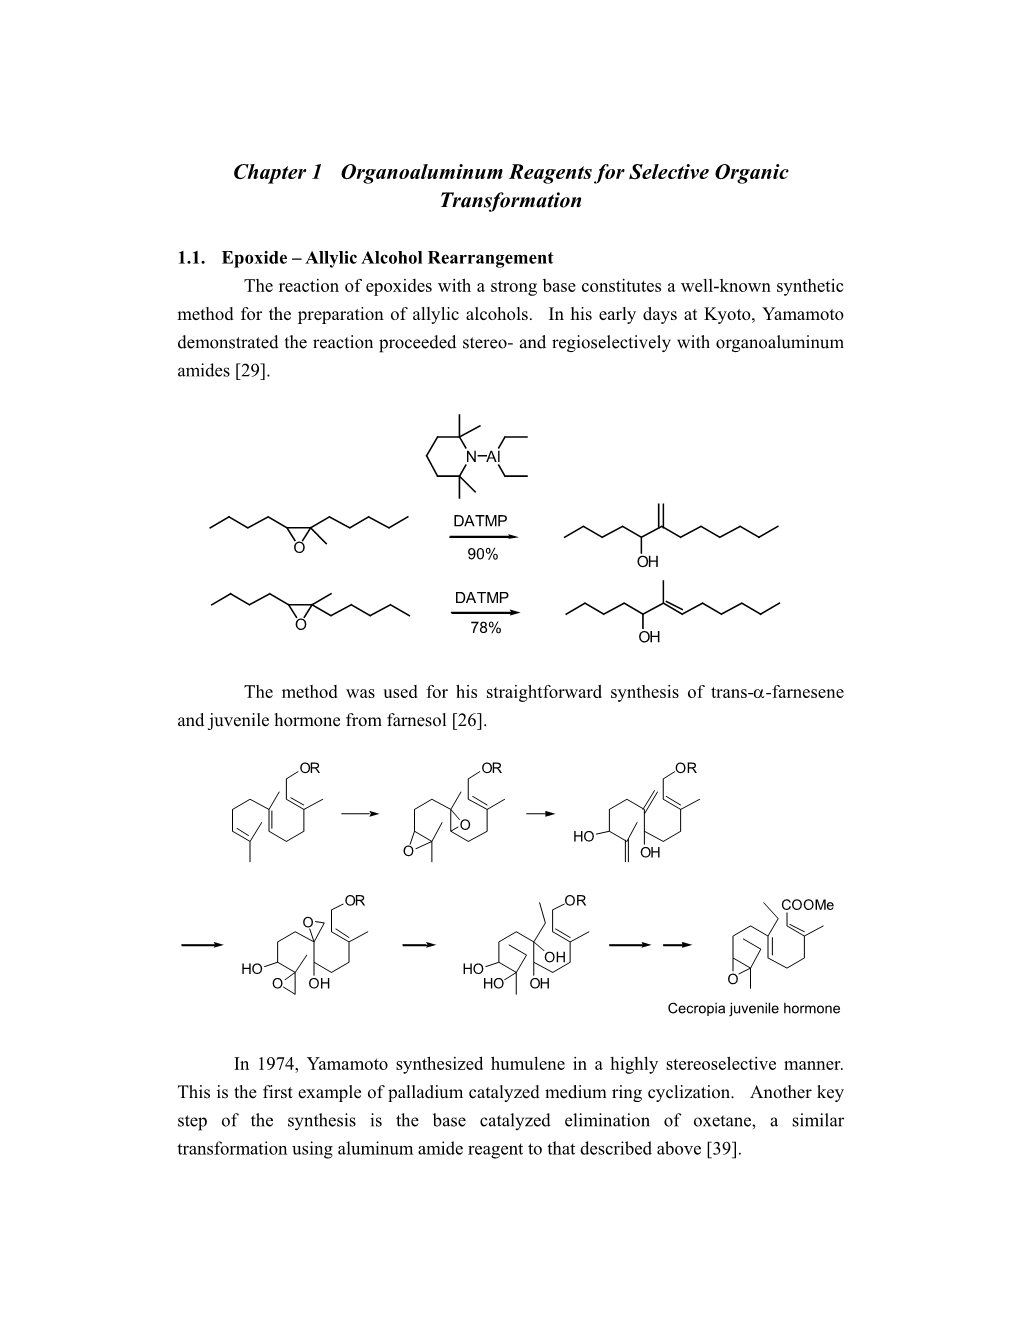 Chapter 1 Organoaluminum Reagents for Selective Organic Transformation